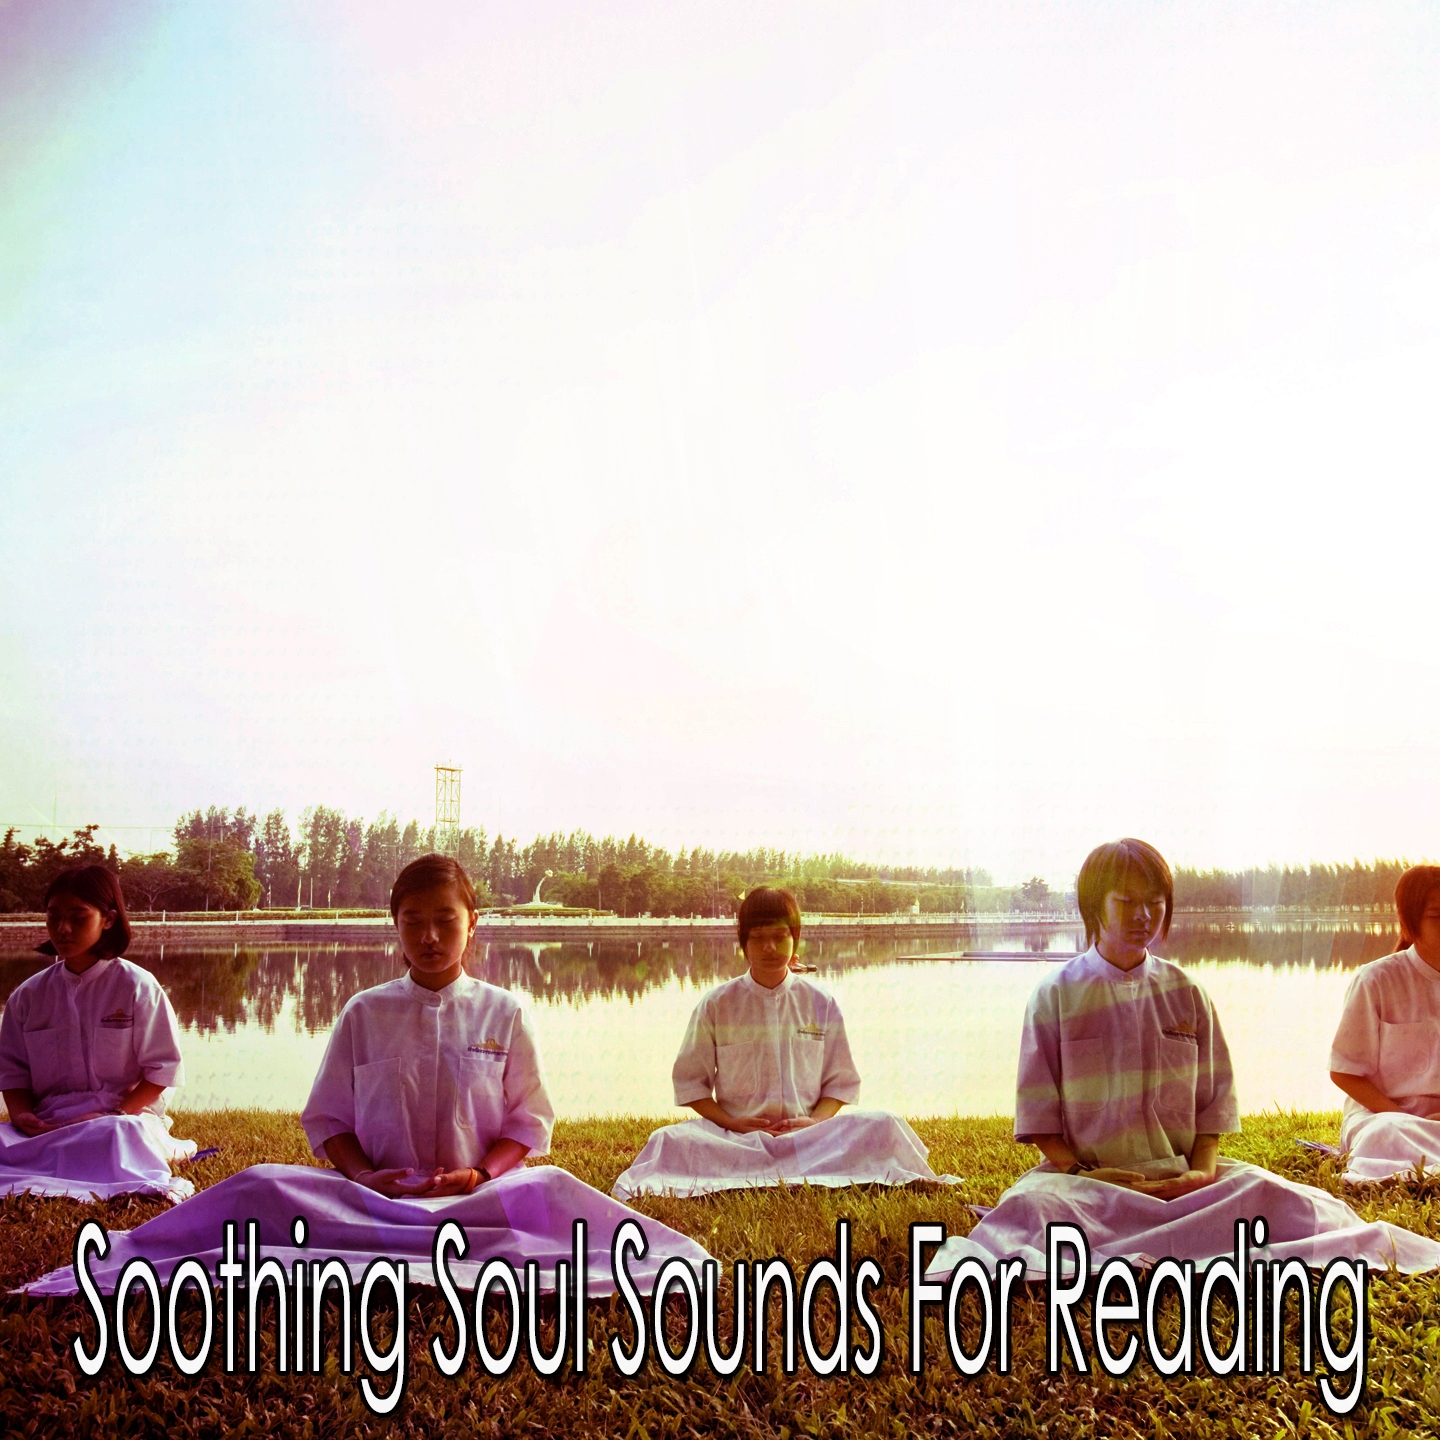 Soothing Soul Sounds For Reading